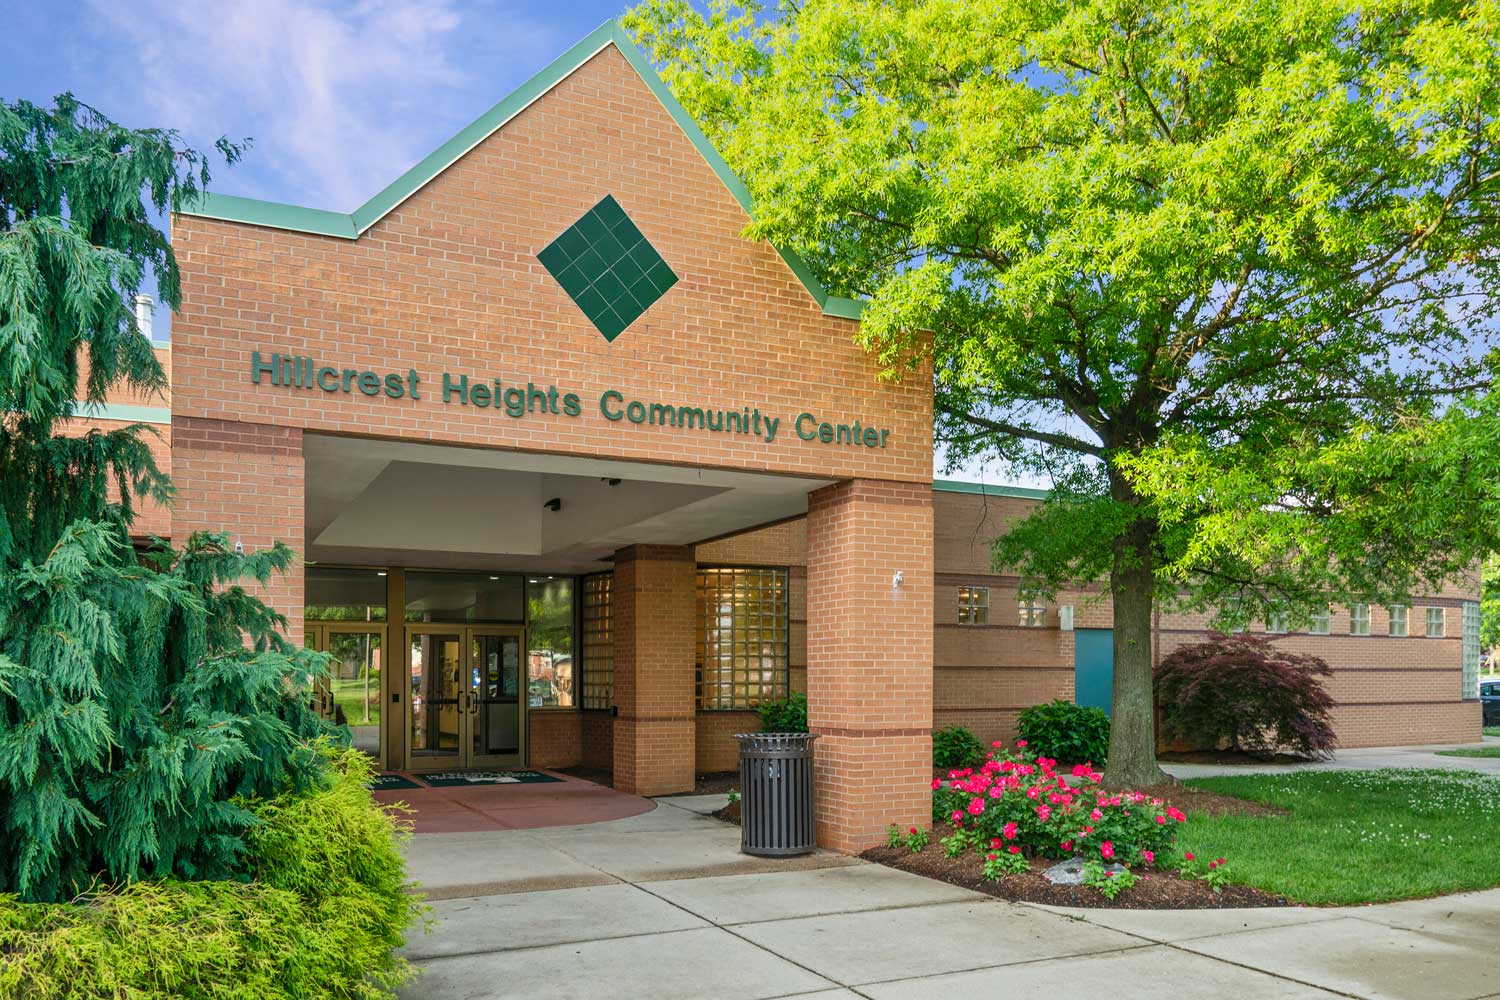 Hillcrest Heights Community Center is 5 minutes from Top of the Hill Apartments